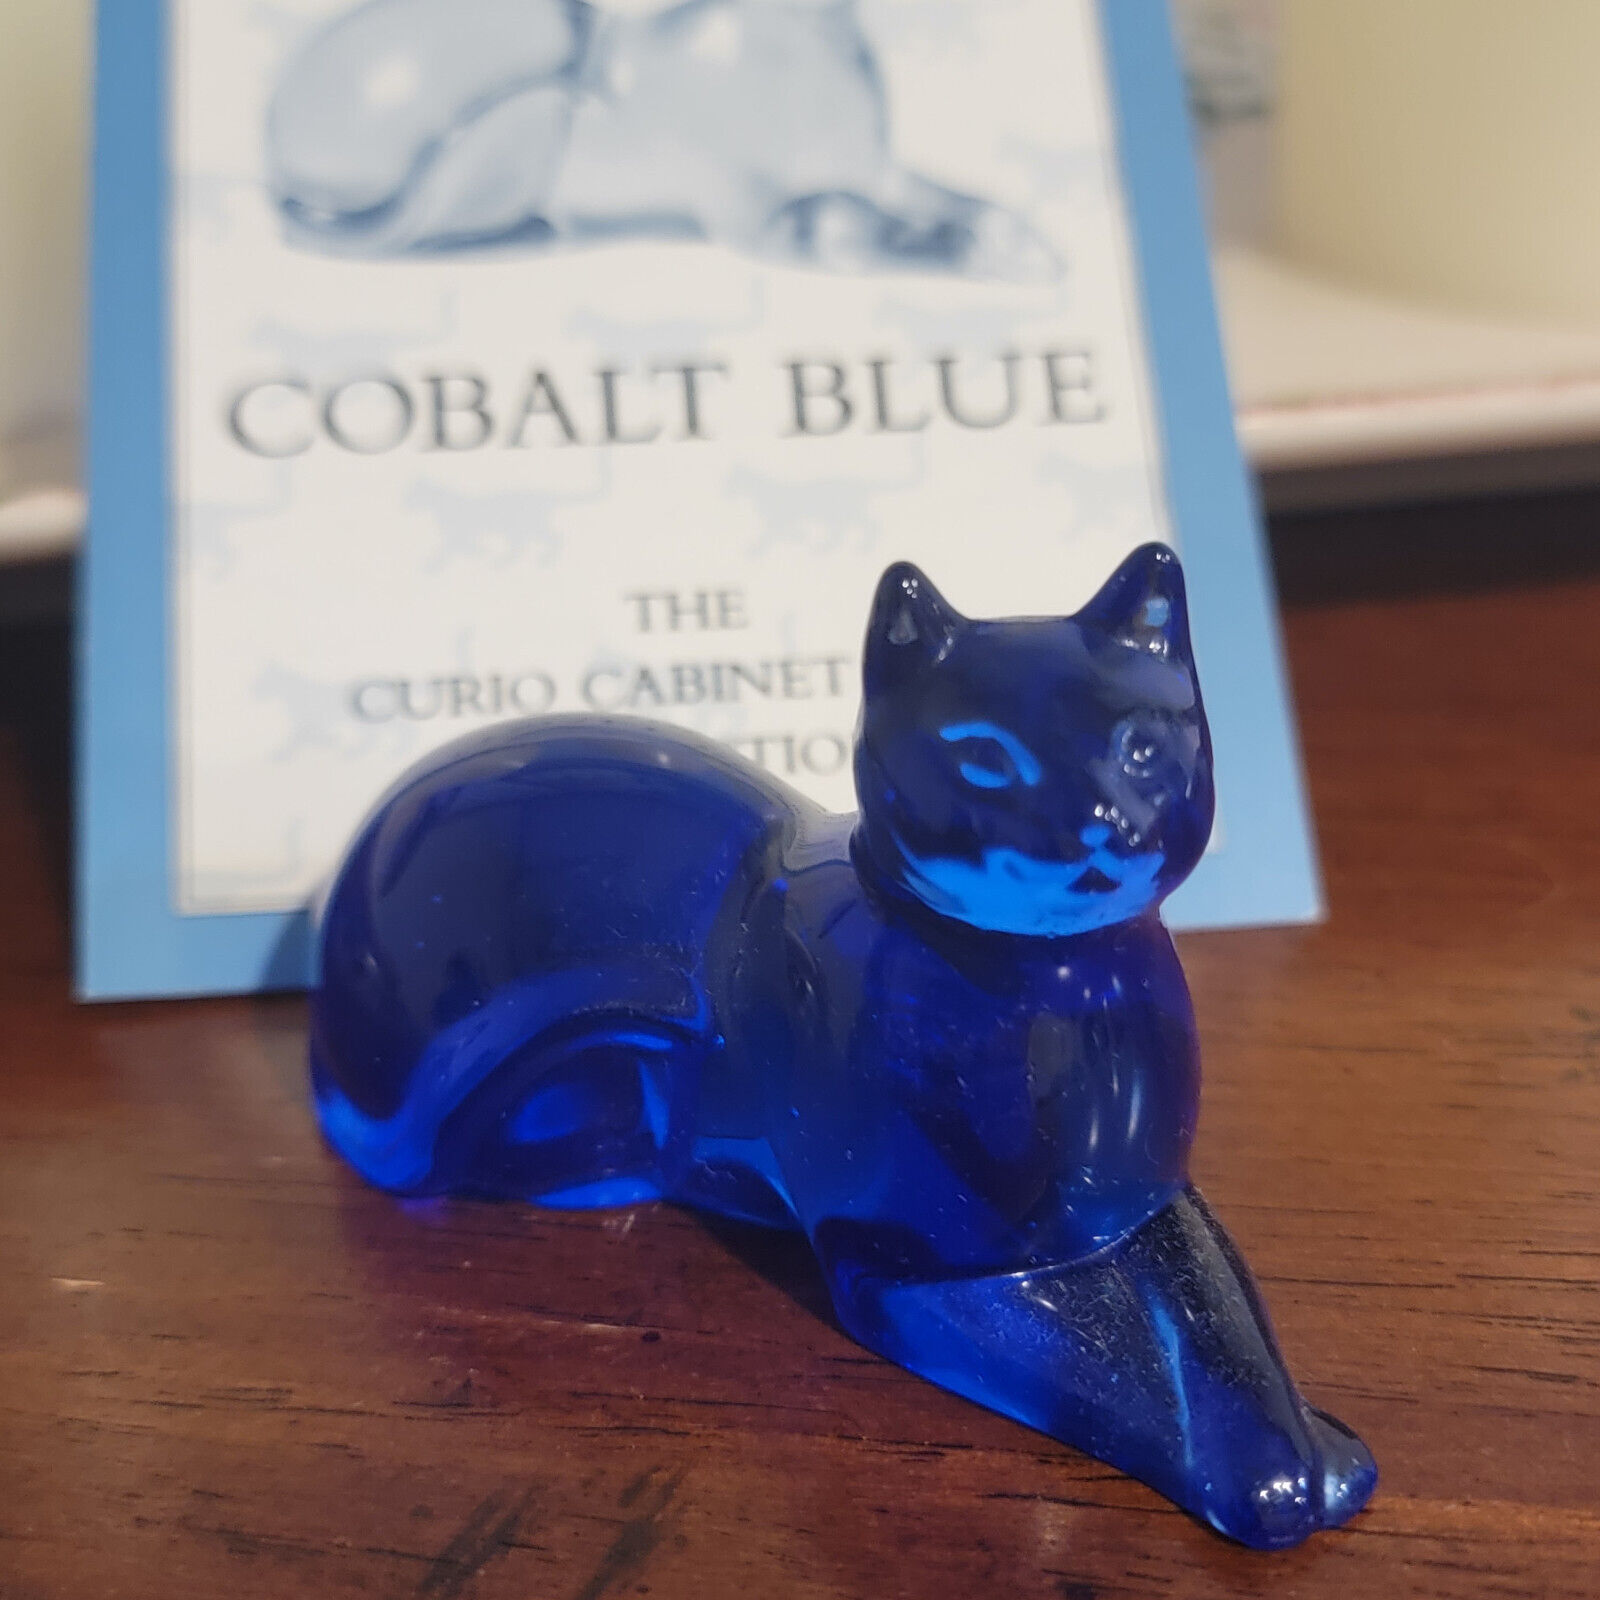 Cobalt Blue Cat Kitty Figurine The Franklin Mint Curio Cabinet Collection 1986